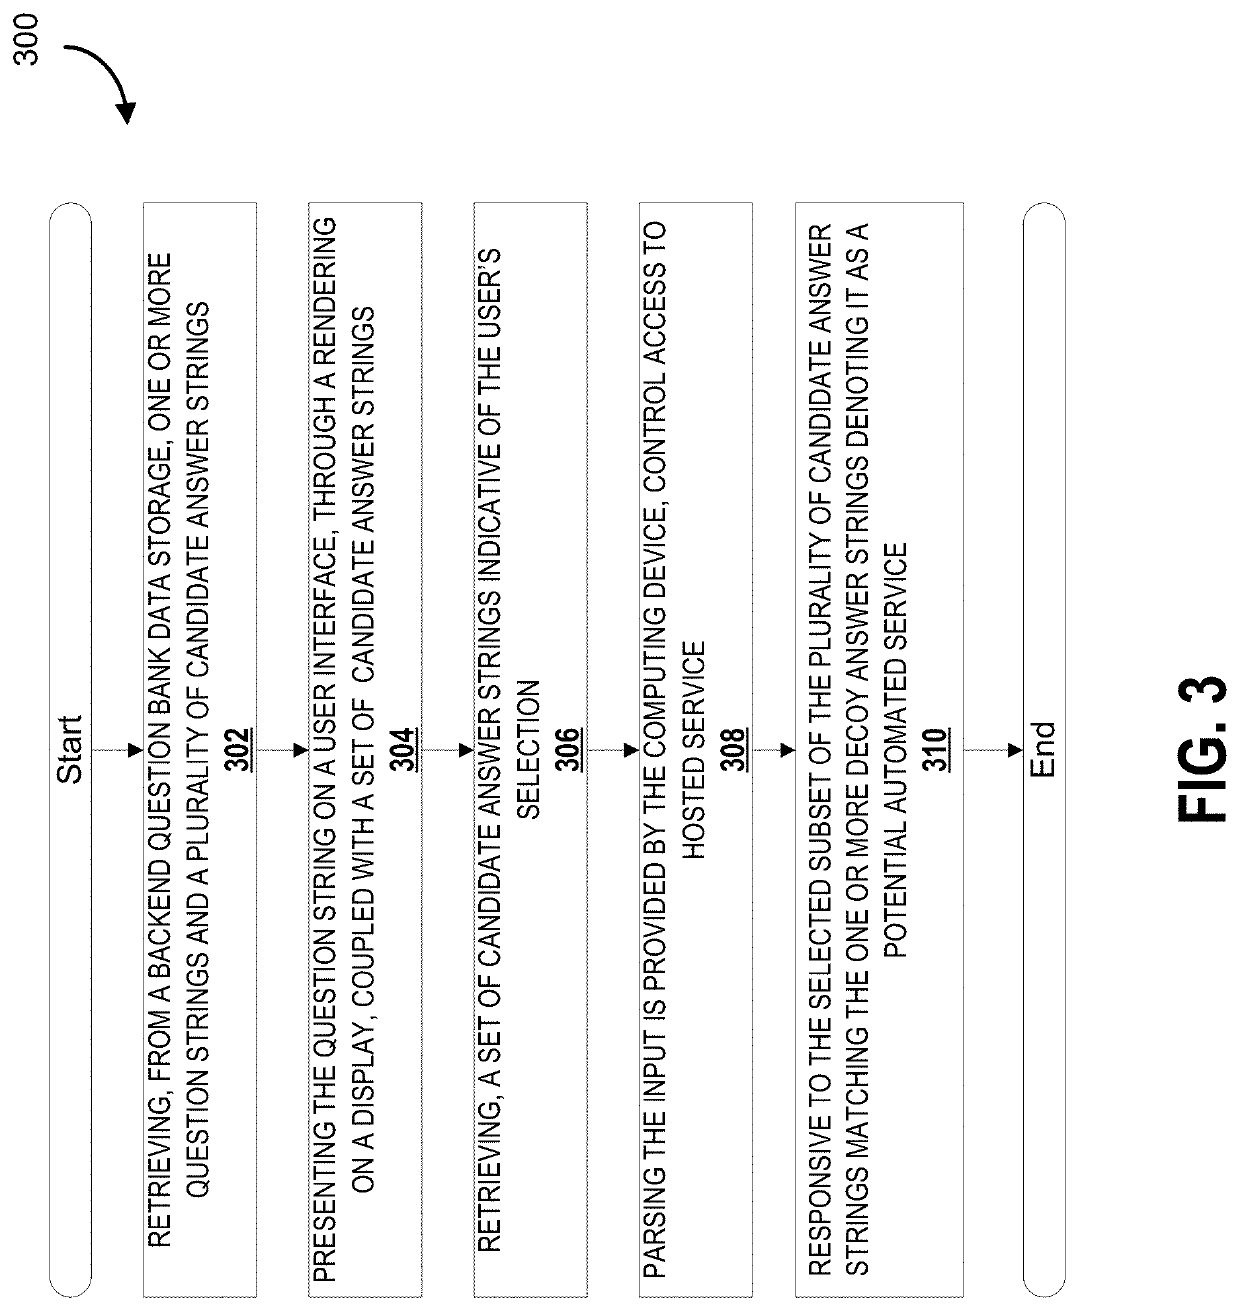 System and method for reverse-turing bot detection